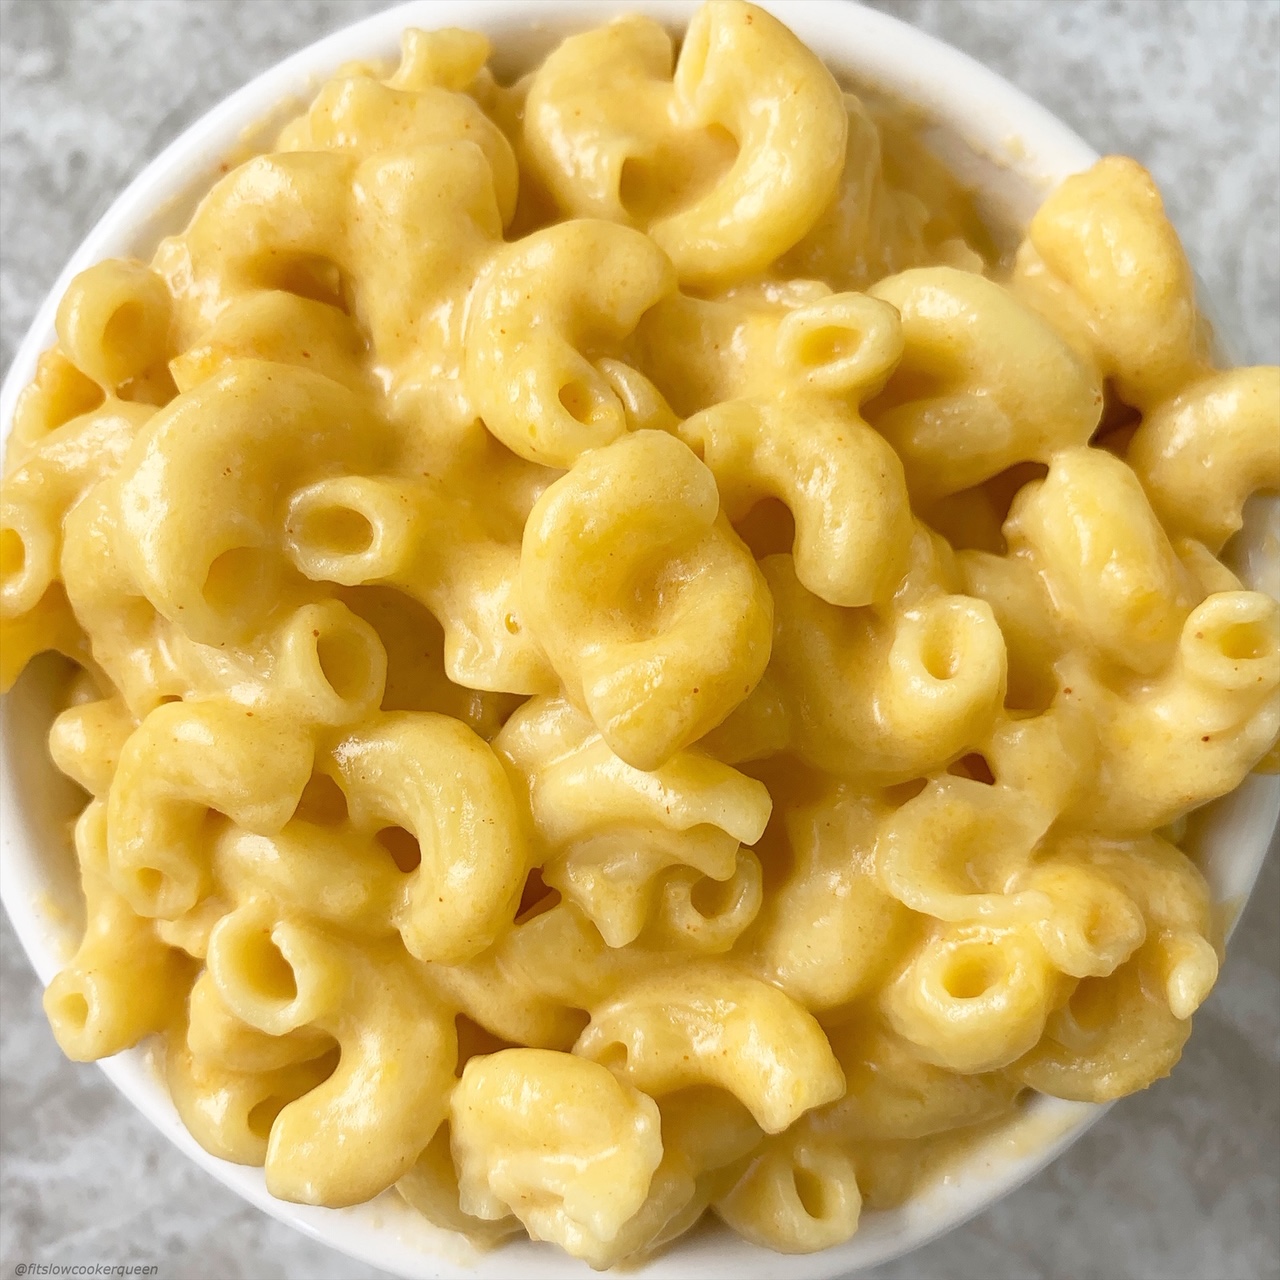 This mac & cheese recipe only uses a few ingredients one of which is uncooked macaroni elbow. Make this easy comfort food in your slow cooker.